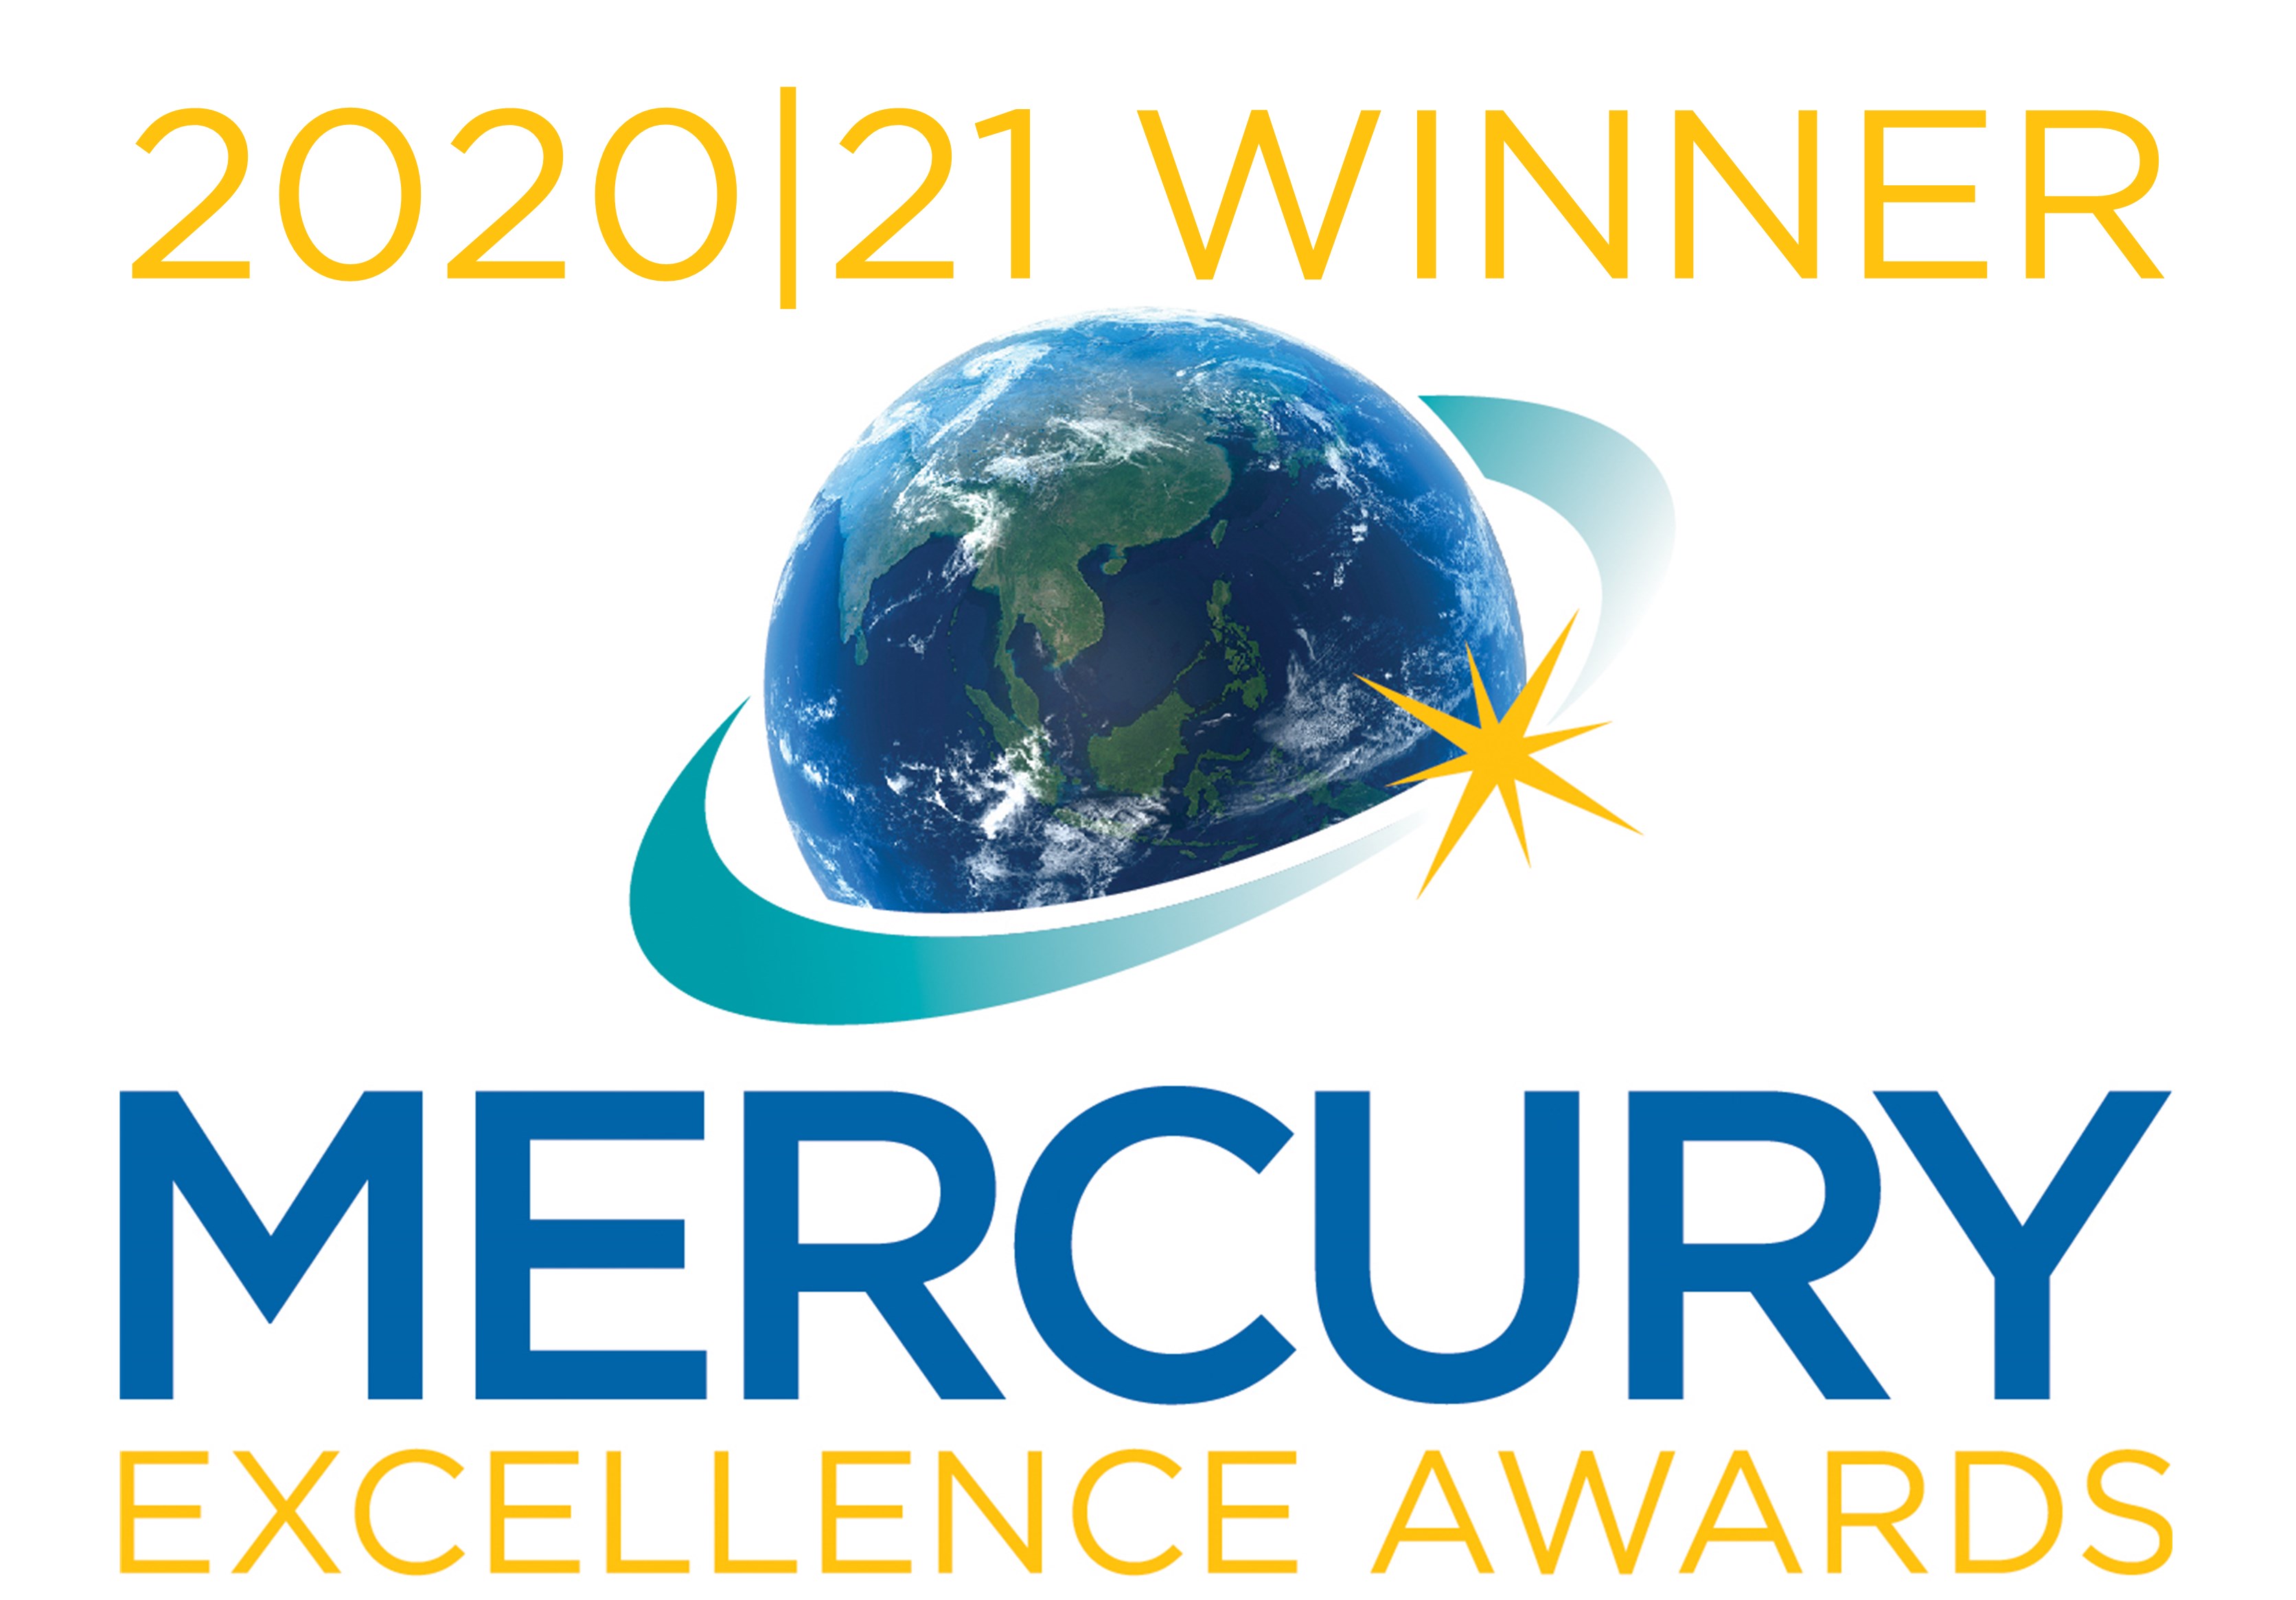 Video “Activities & Achievements – Onwards & Upwards” won the “Grand Winner – Best of Video category” in the Mercury Excellence Awards 2020/2021.